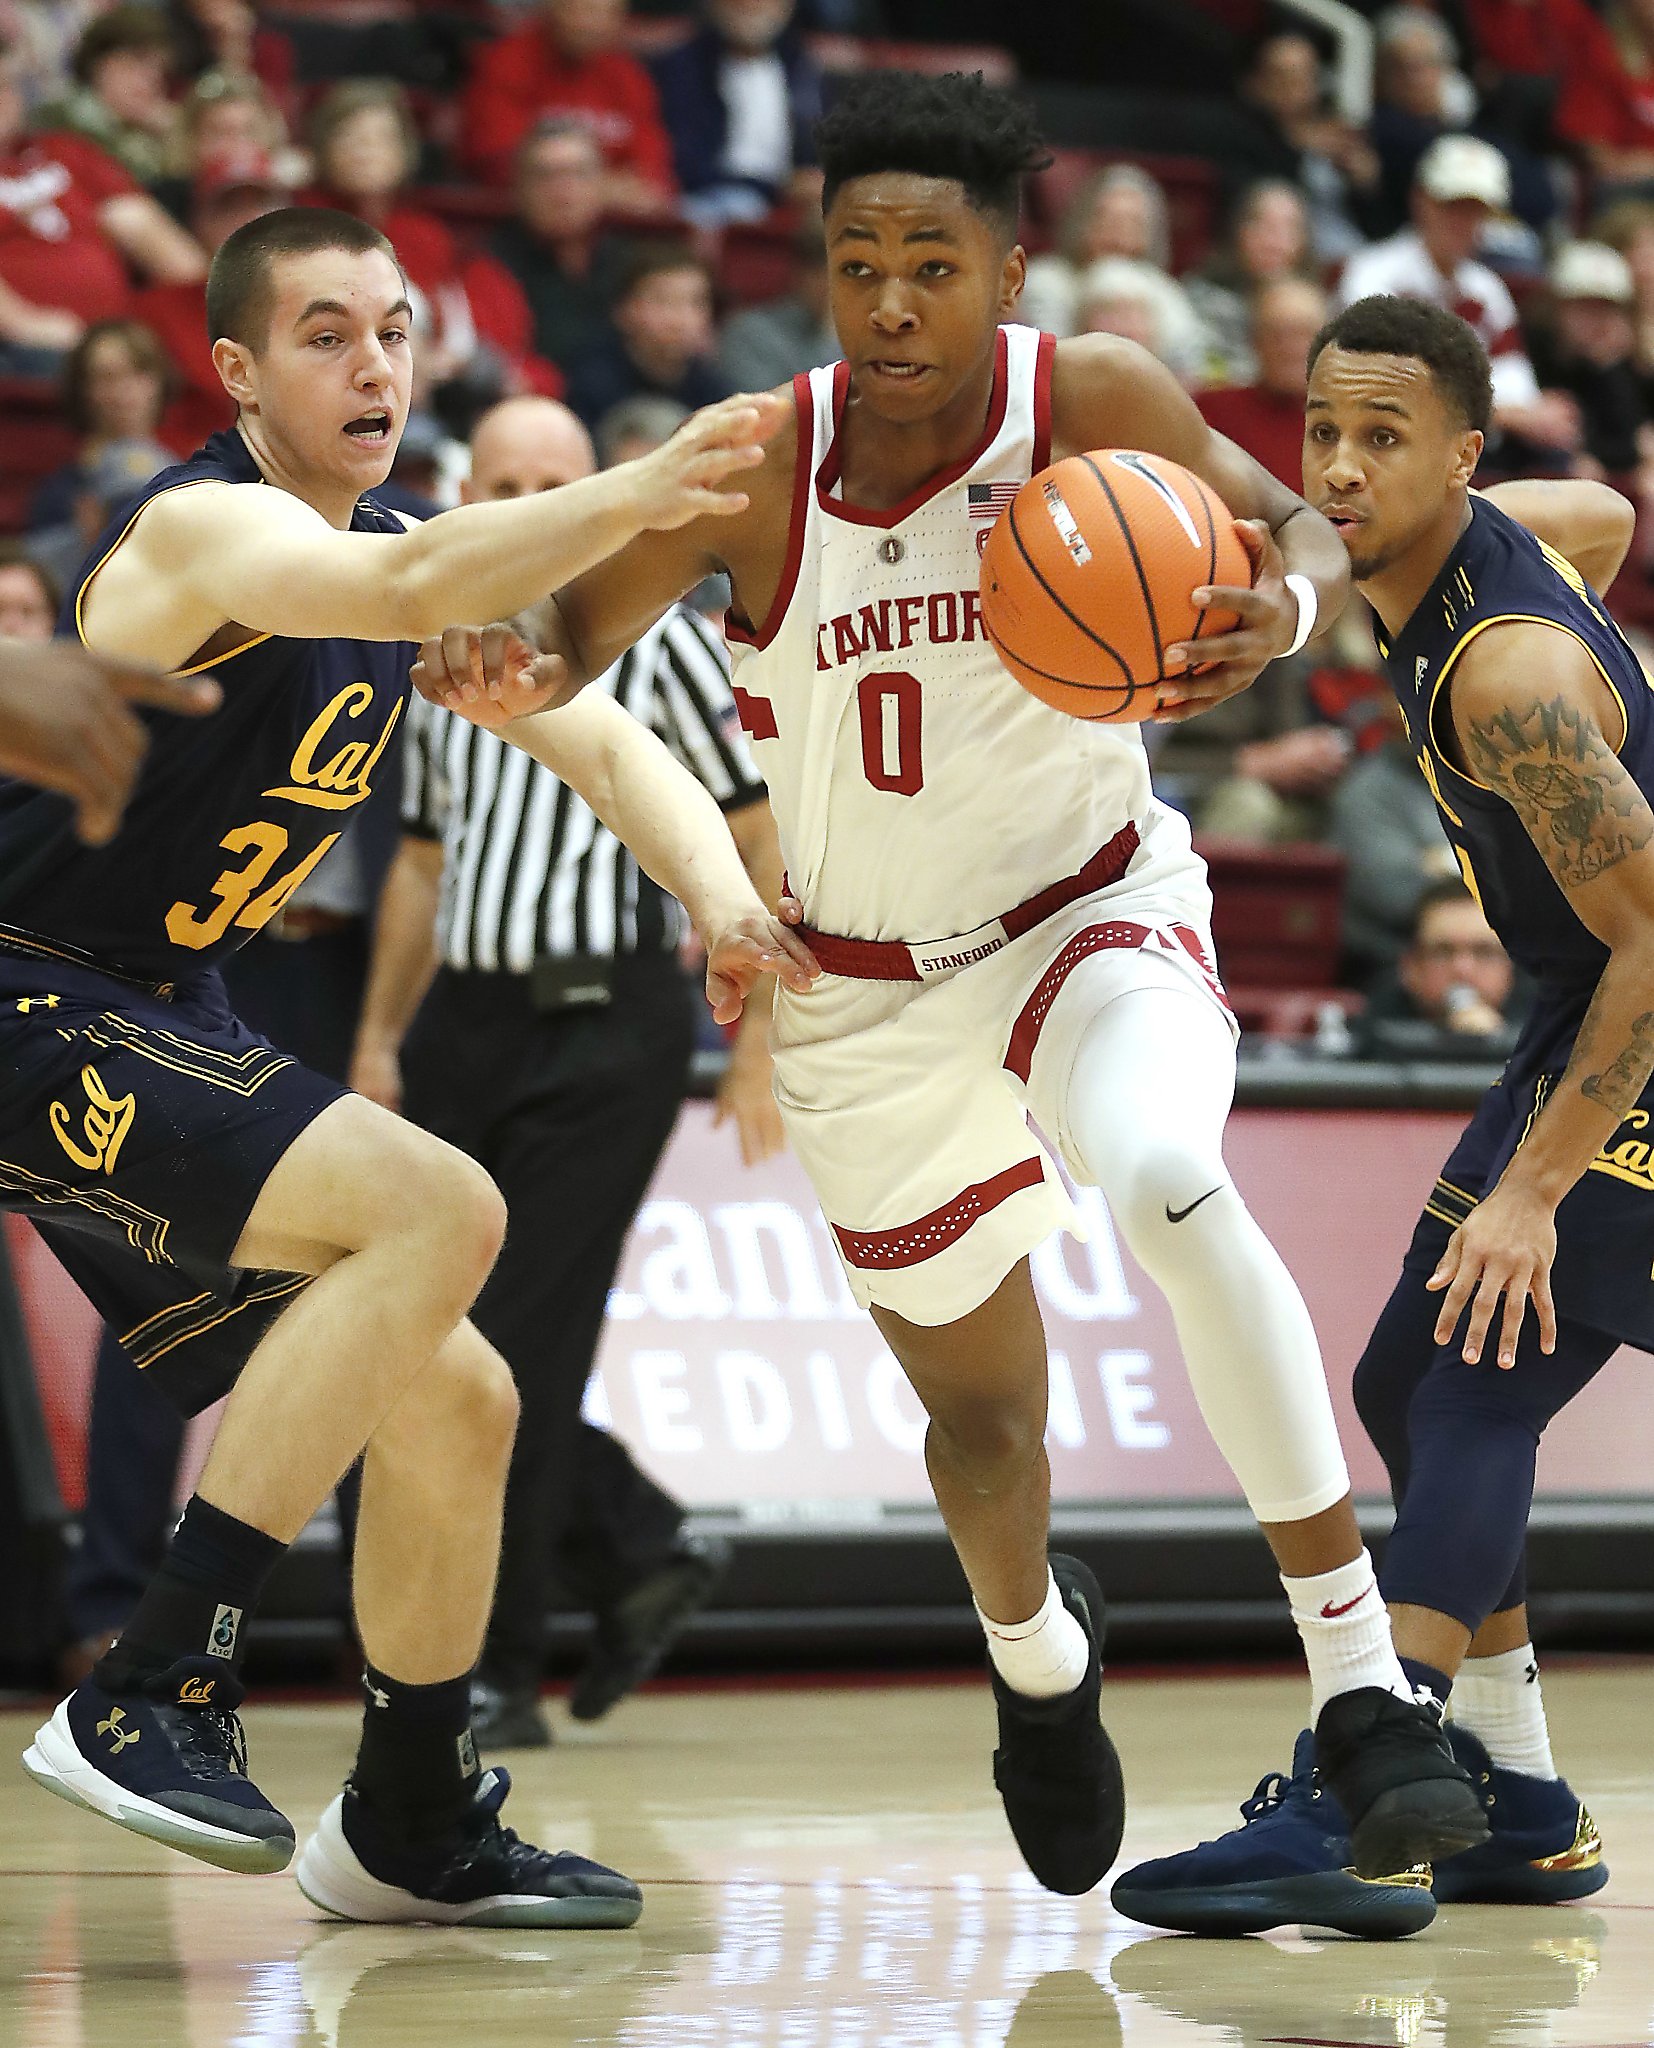 Okpala, Pickens give Stanford hope after discouraging loss - SFGate1654 x 2048